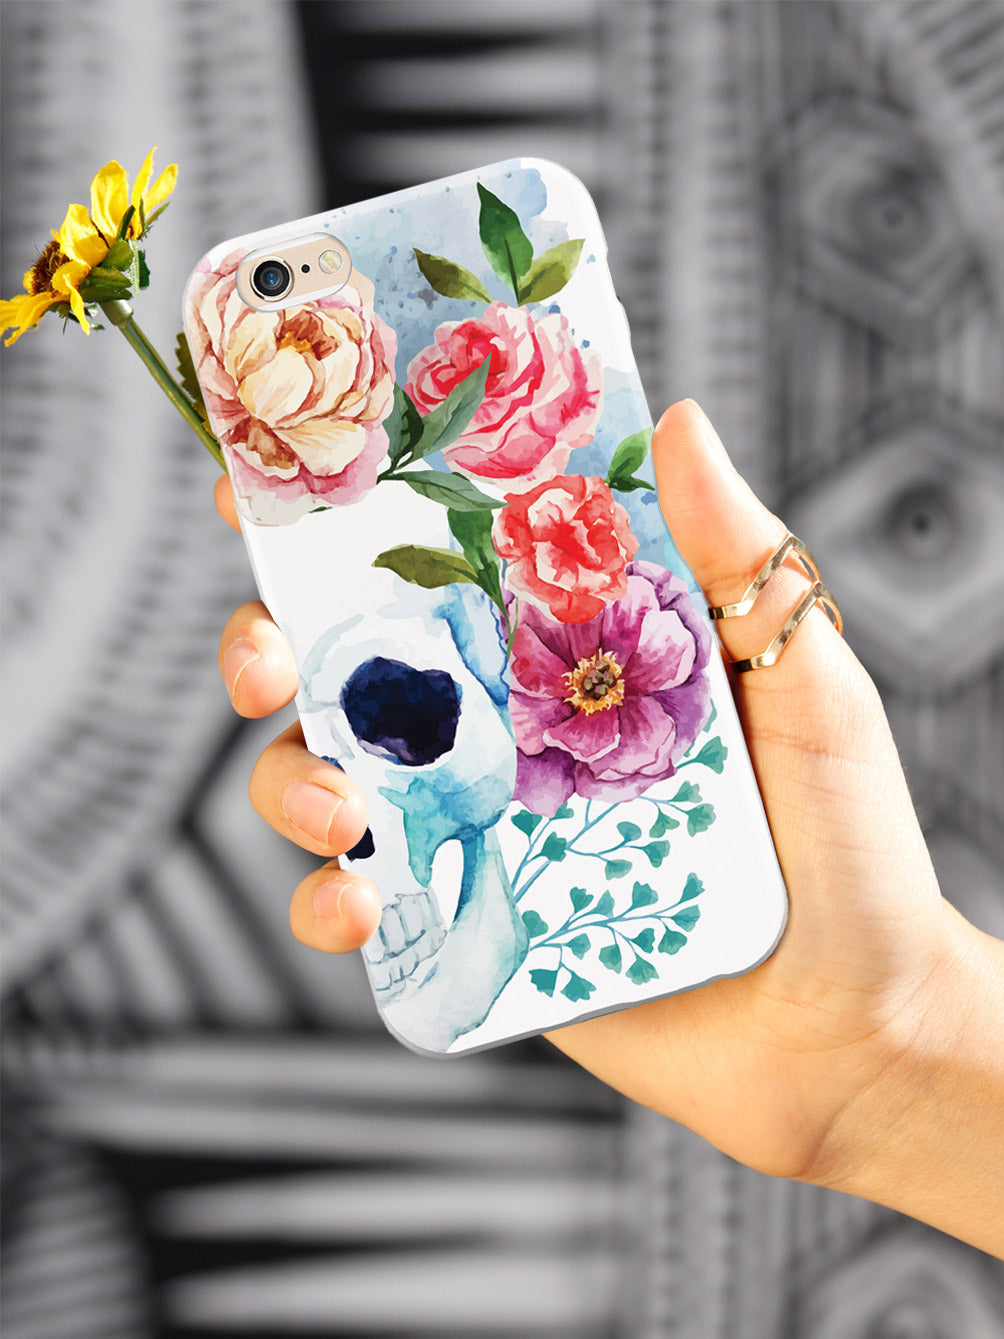 Watercolor Skull and Flowers Case